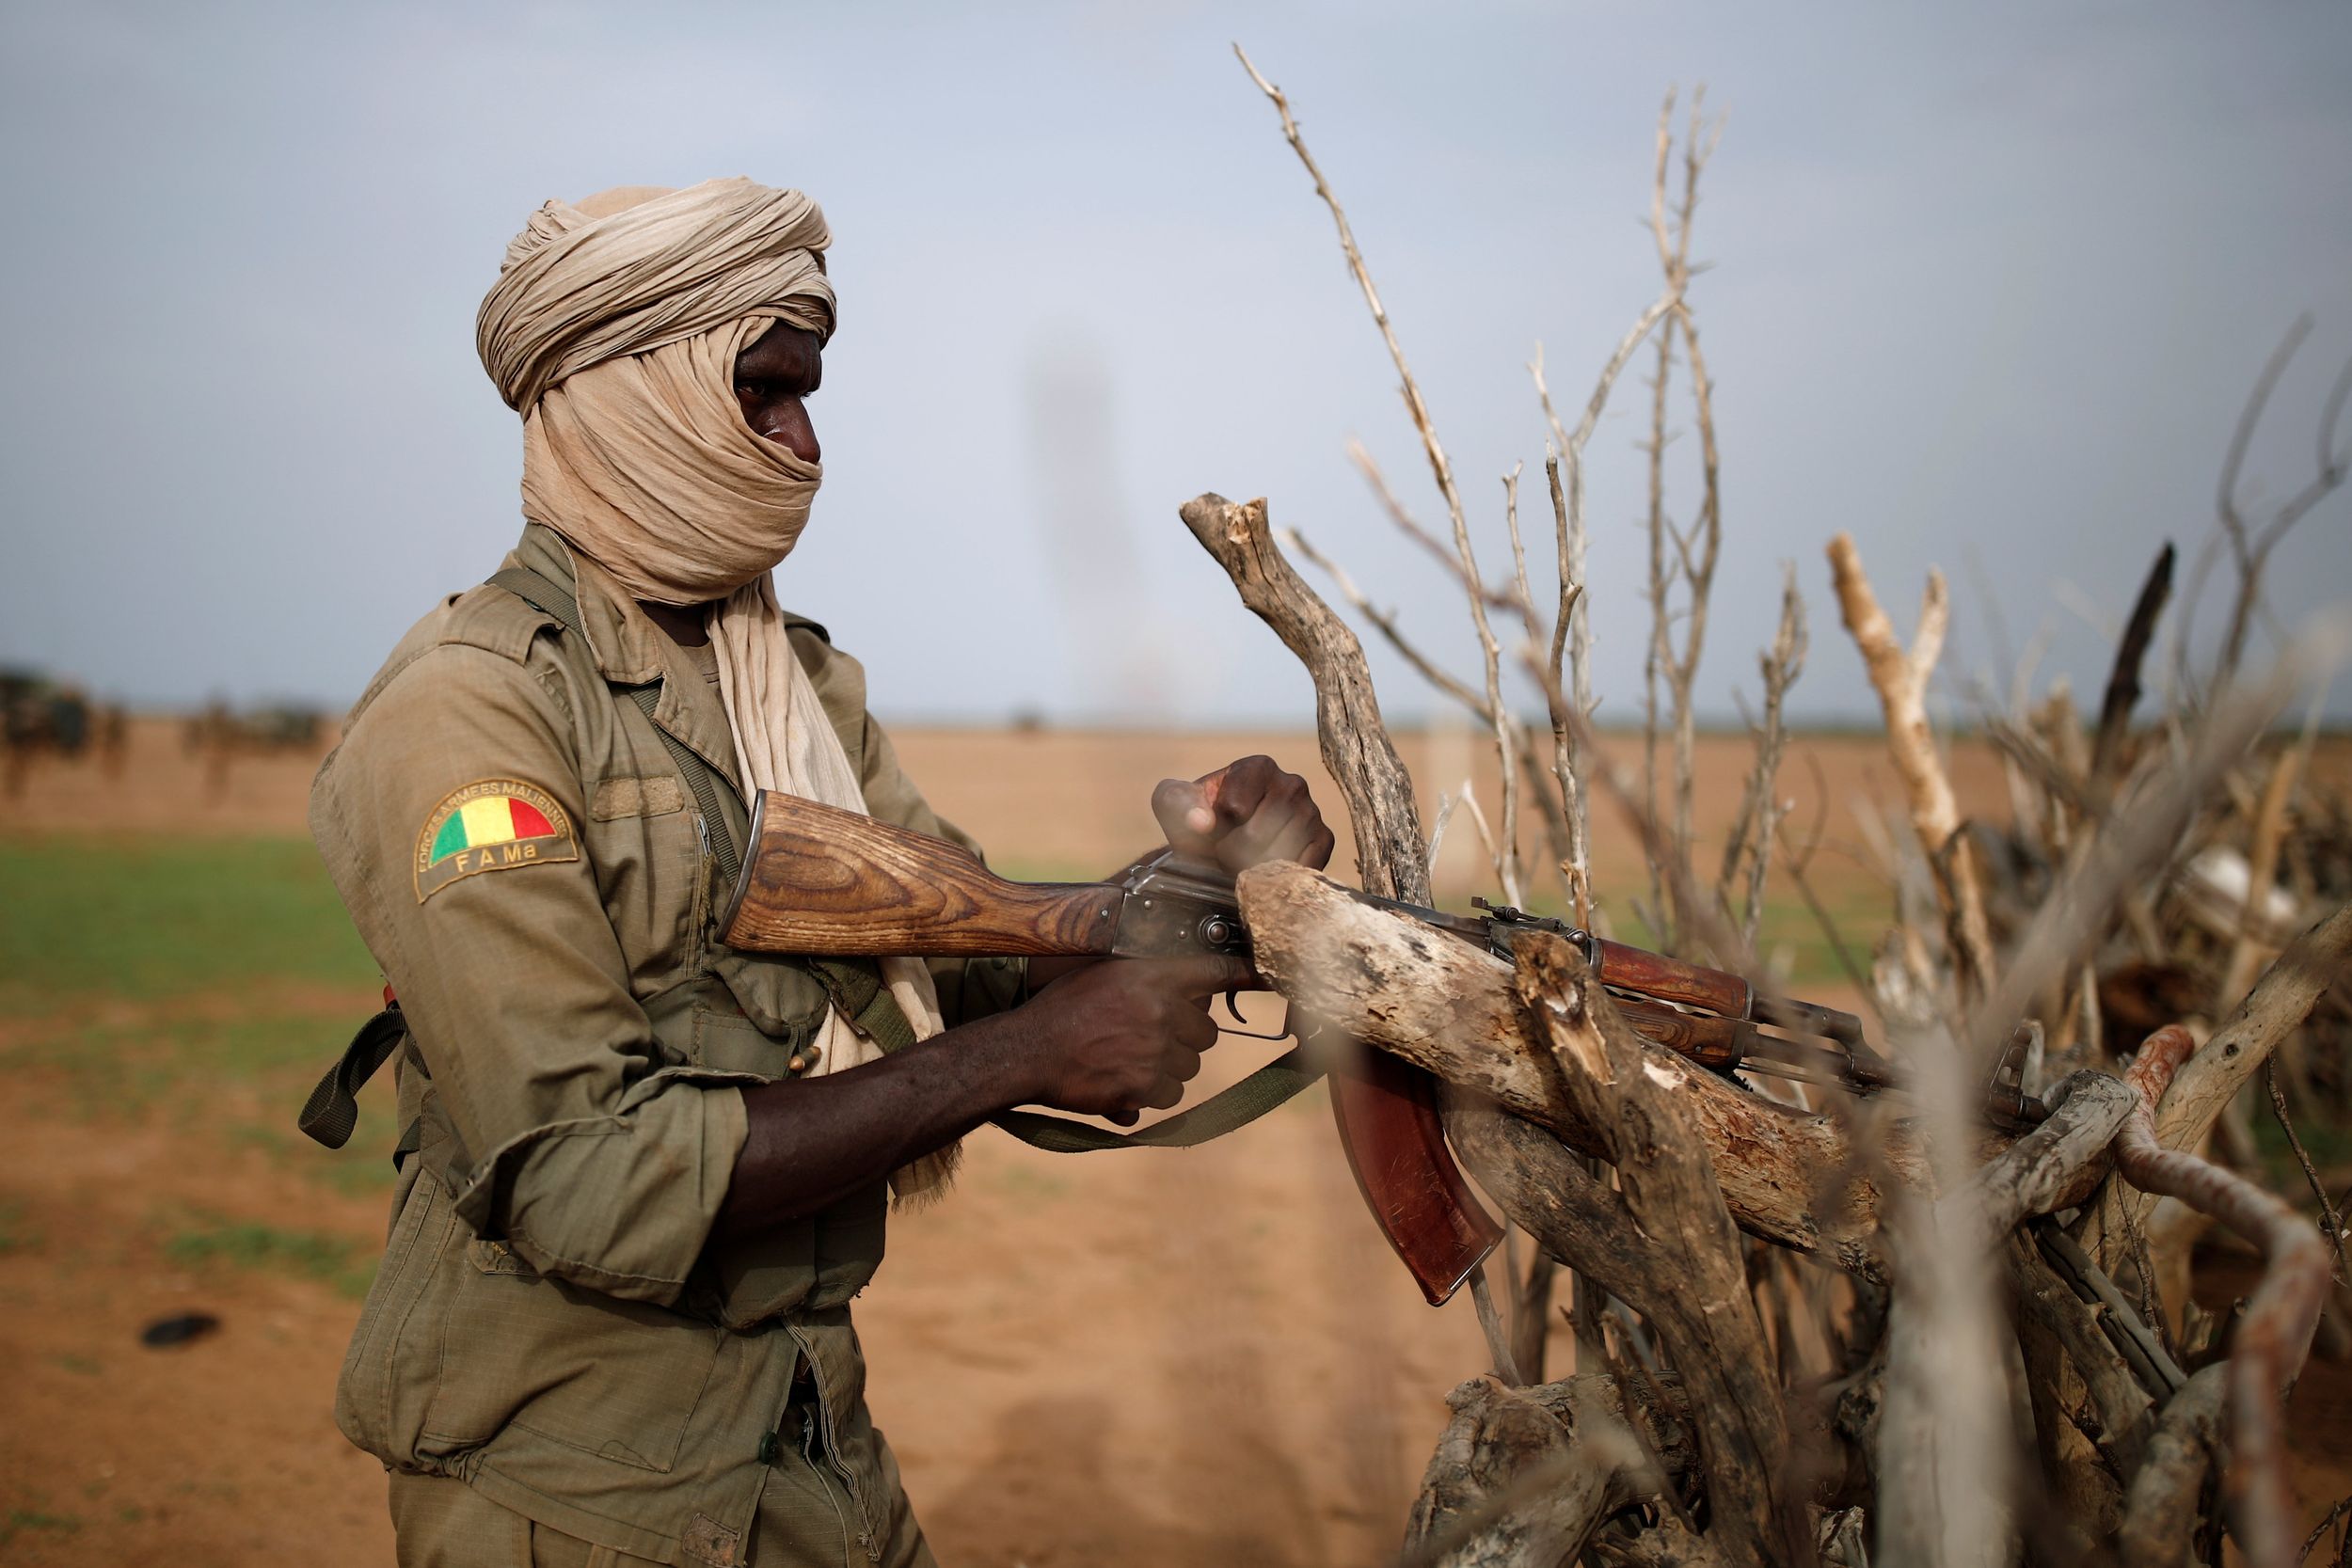 If you're worried about terrorism, worry about the Sahel